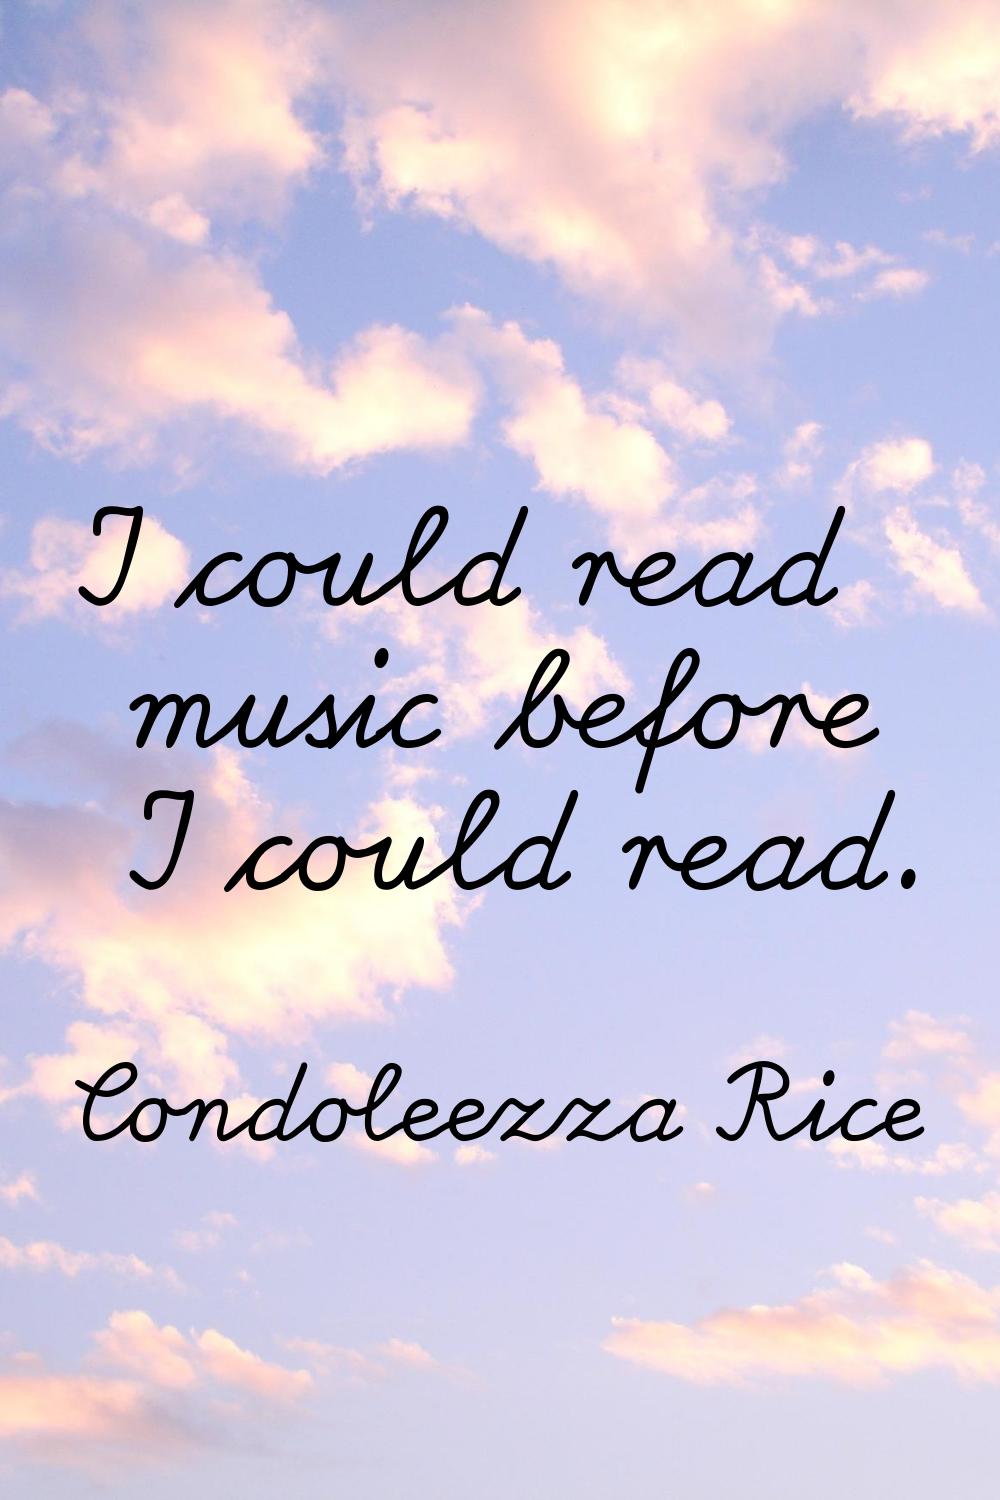 I could read music before I could read.